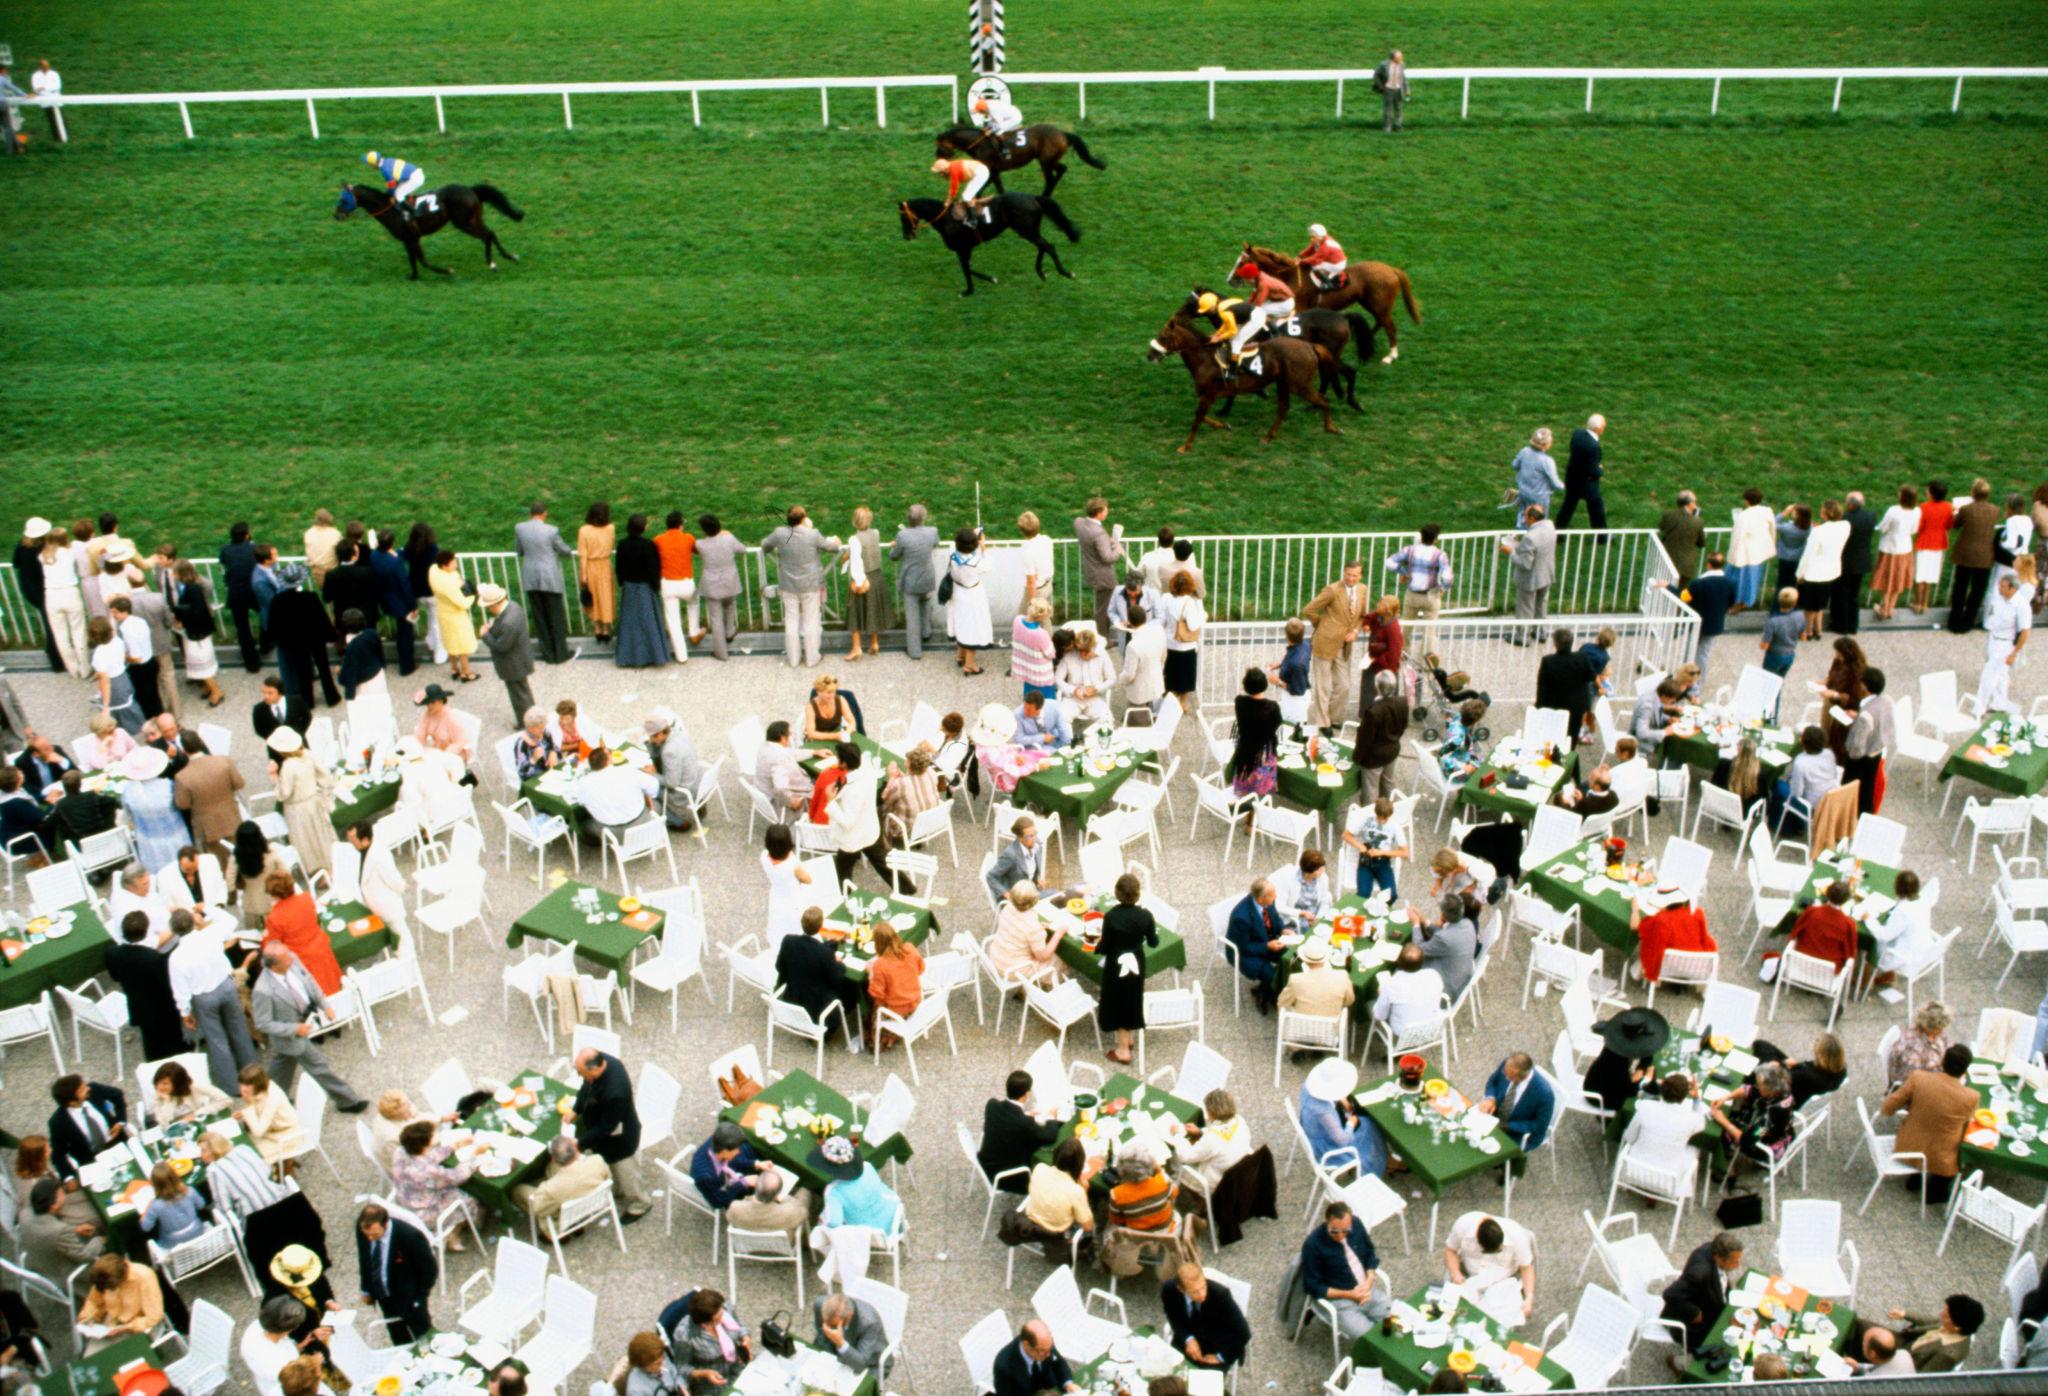 'Racing At Baden Baden' 1978 Slim Aarons Limited Estate Edition Print 

Spectators dine in the open air as the horses go by at Baden Baden racecourse, Germany, September 1978. 

Produced from the original transparency
Certificate of authenticity